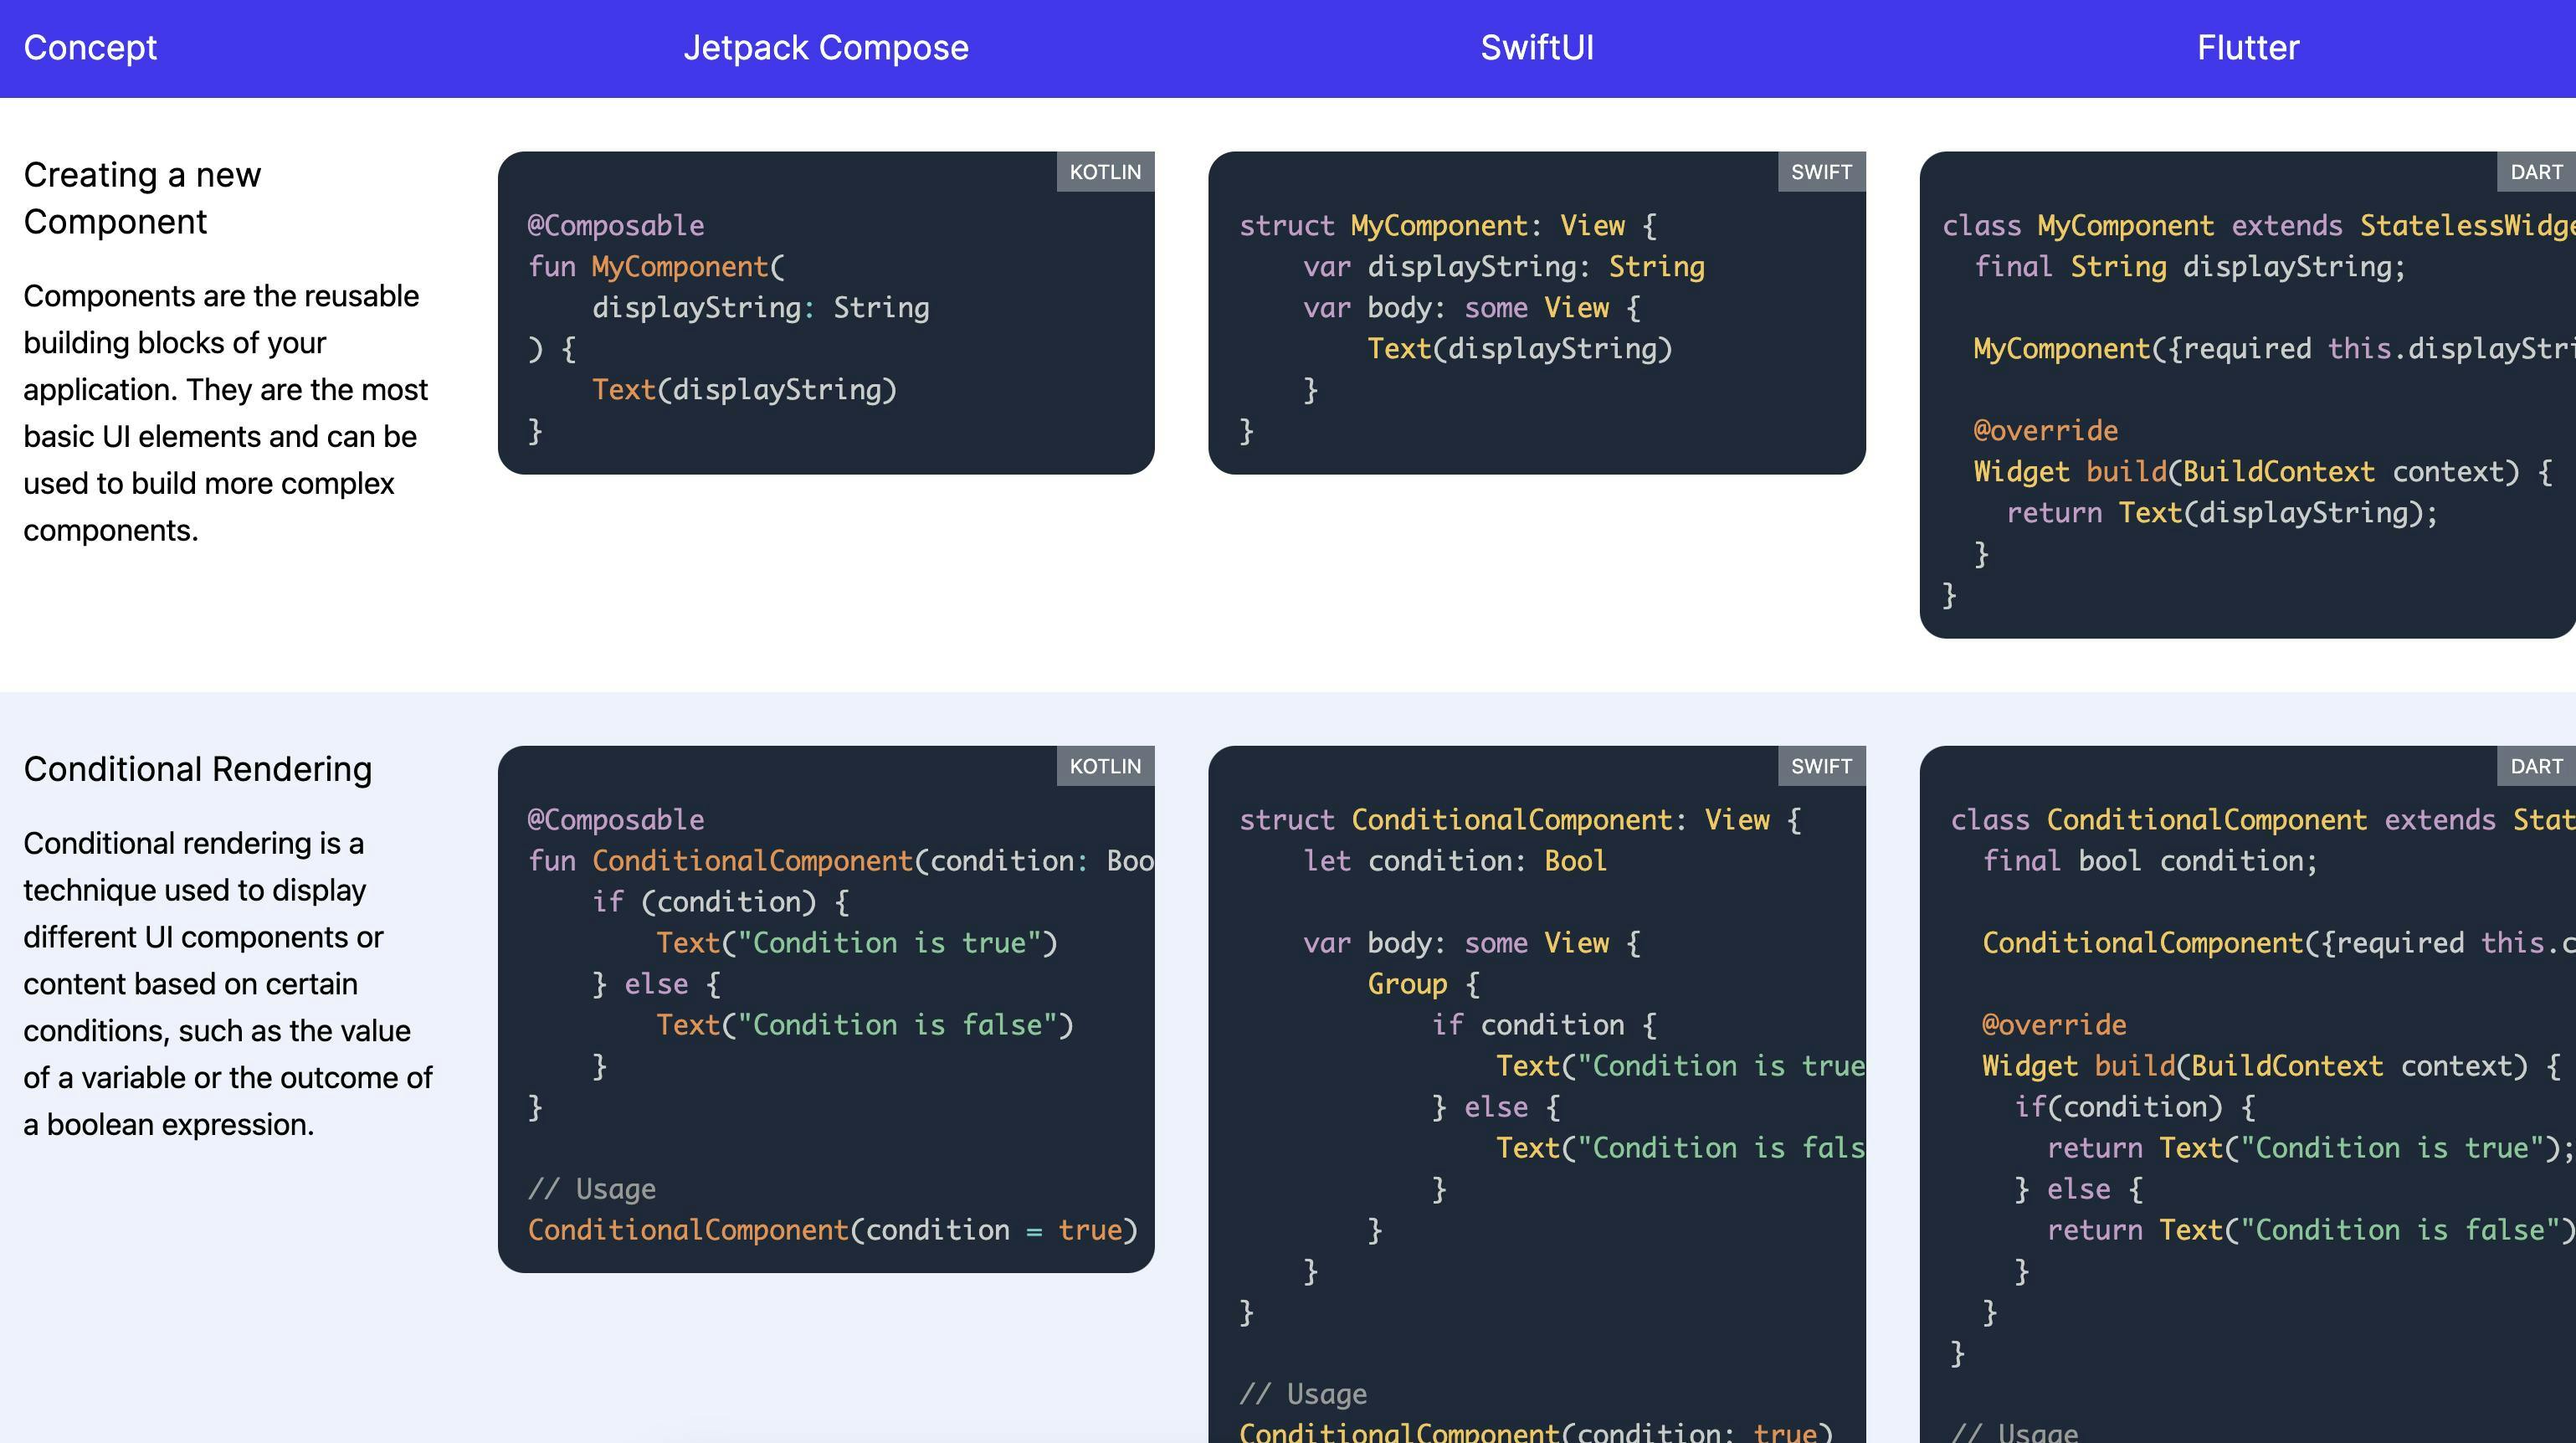 Comparison of rendering simple UIs in Compose, SwiftUI and Flutter (source: https://www.jetpackcompose.app/compare-declarative-frameworks/JetpackCompose-vs-SwiftUI-vs-Flutter)